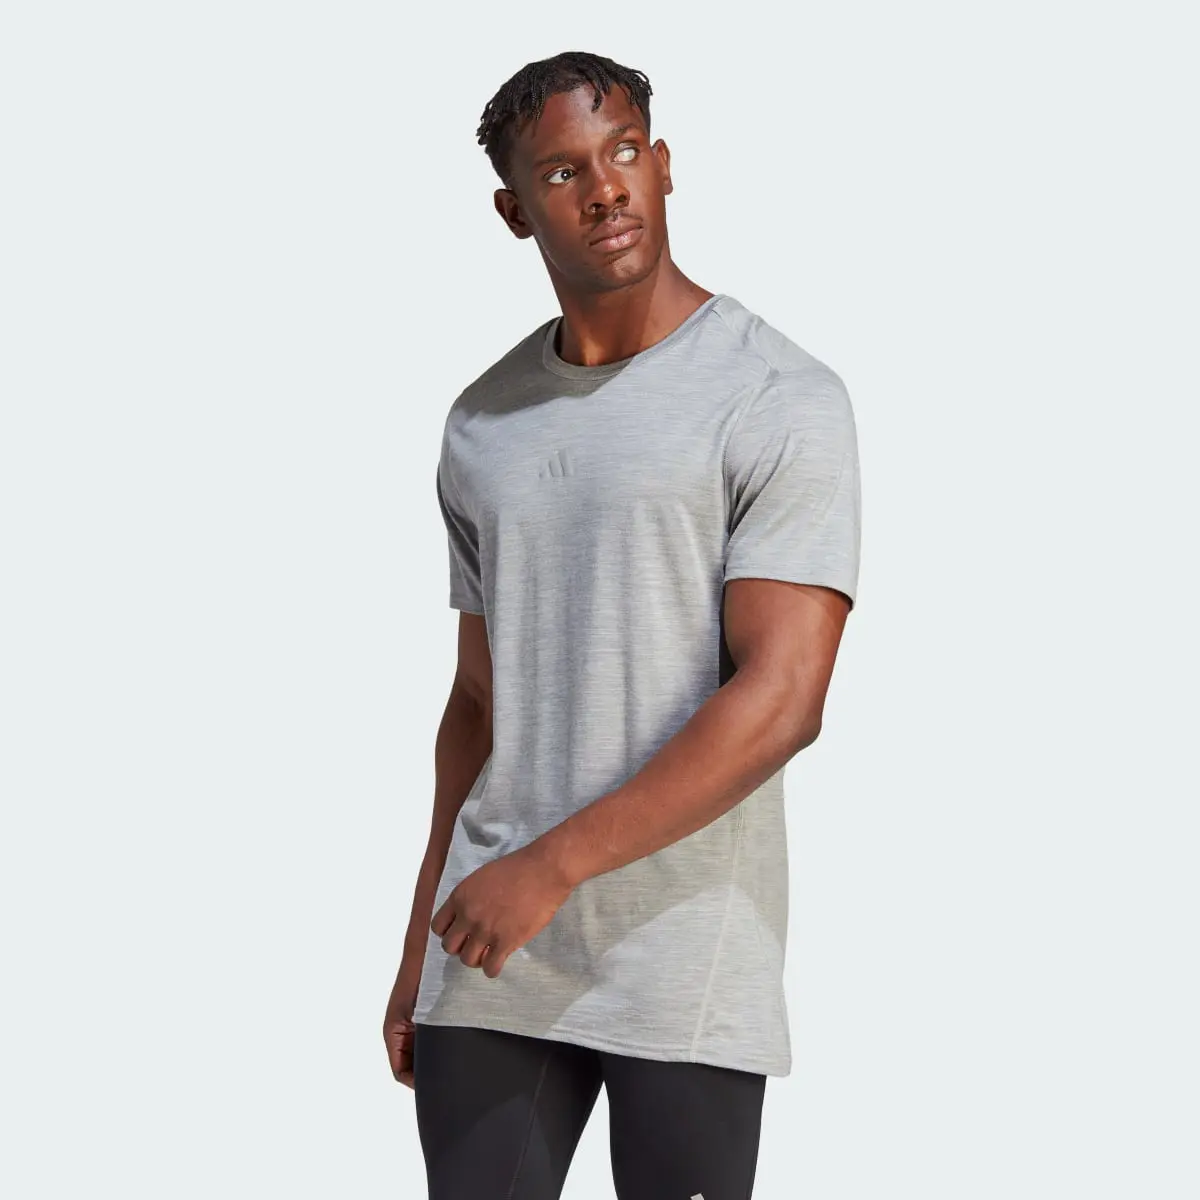 Adidas Ultimate Running Conquer the Elements Merino Tee. 2